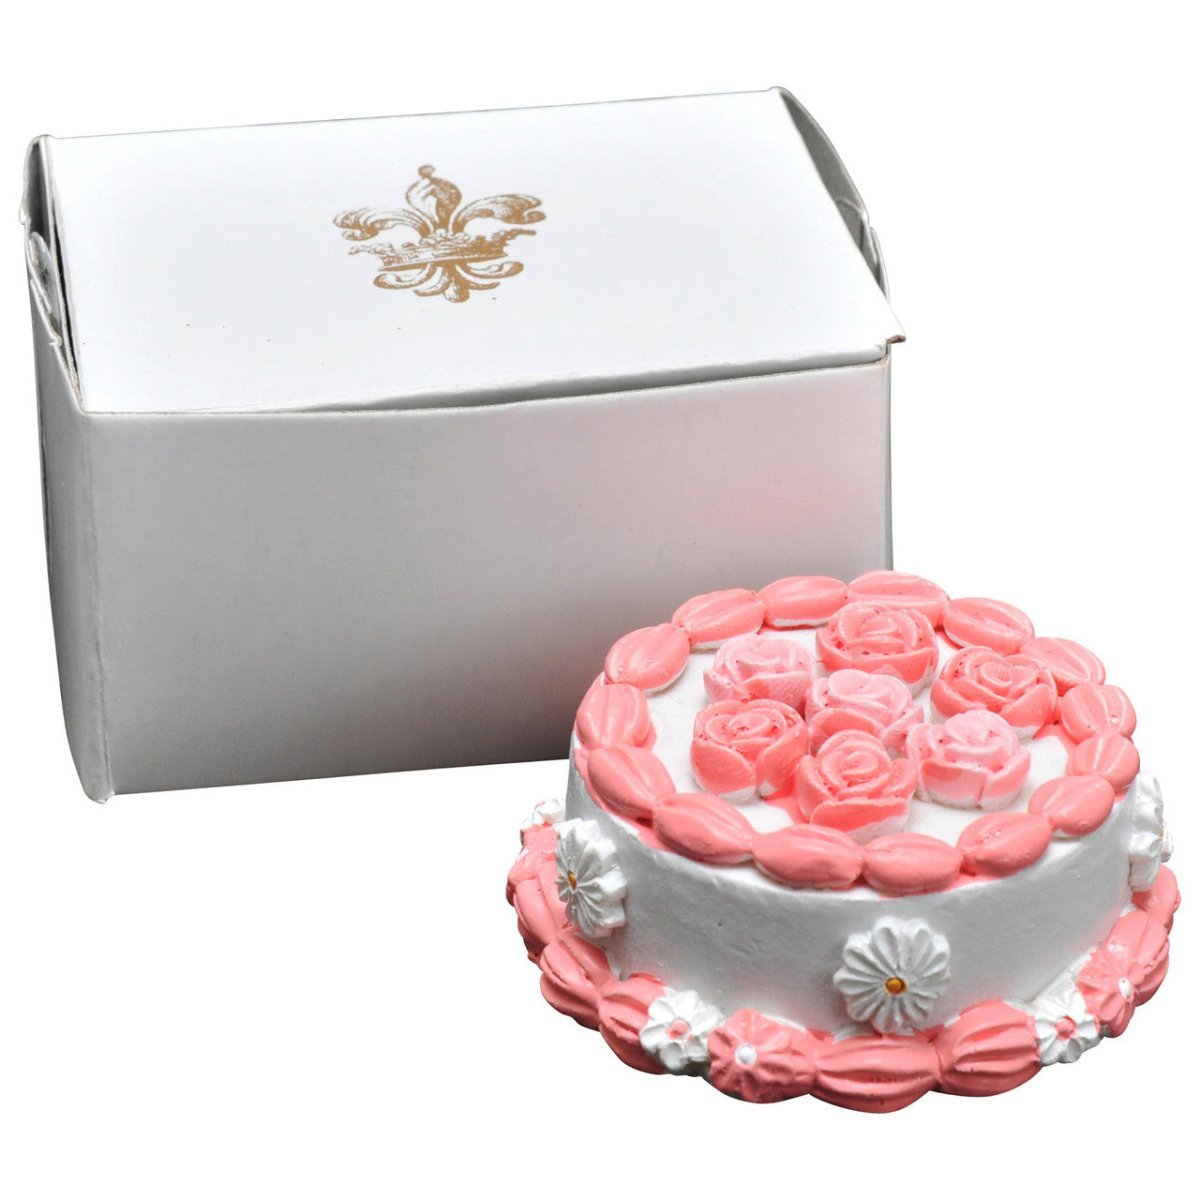 Pink & White Party Cake with Bakery Box, Accessories for 18 Inch Dolls - Simon's Collectibles